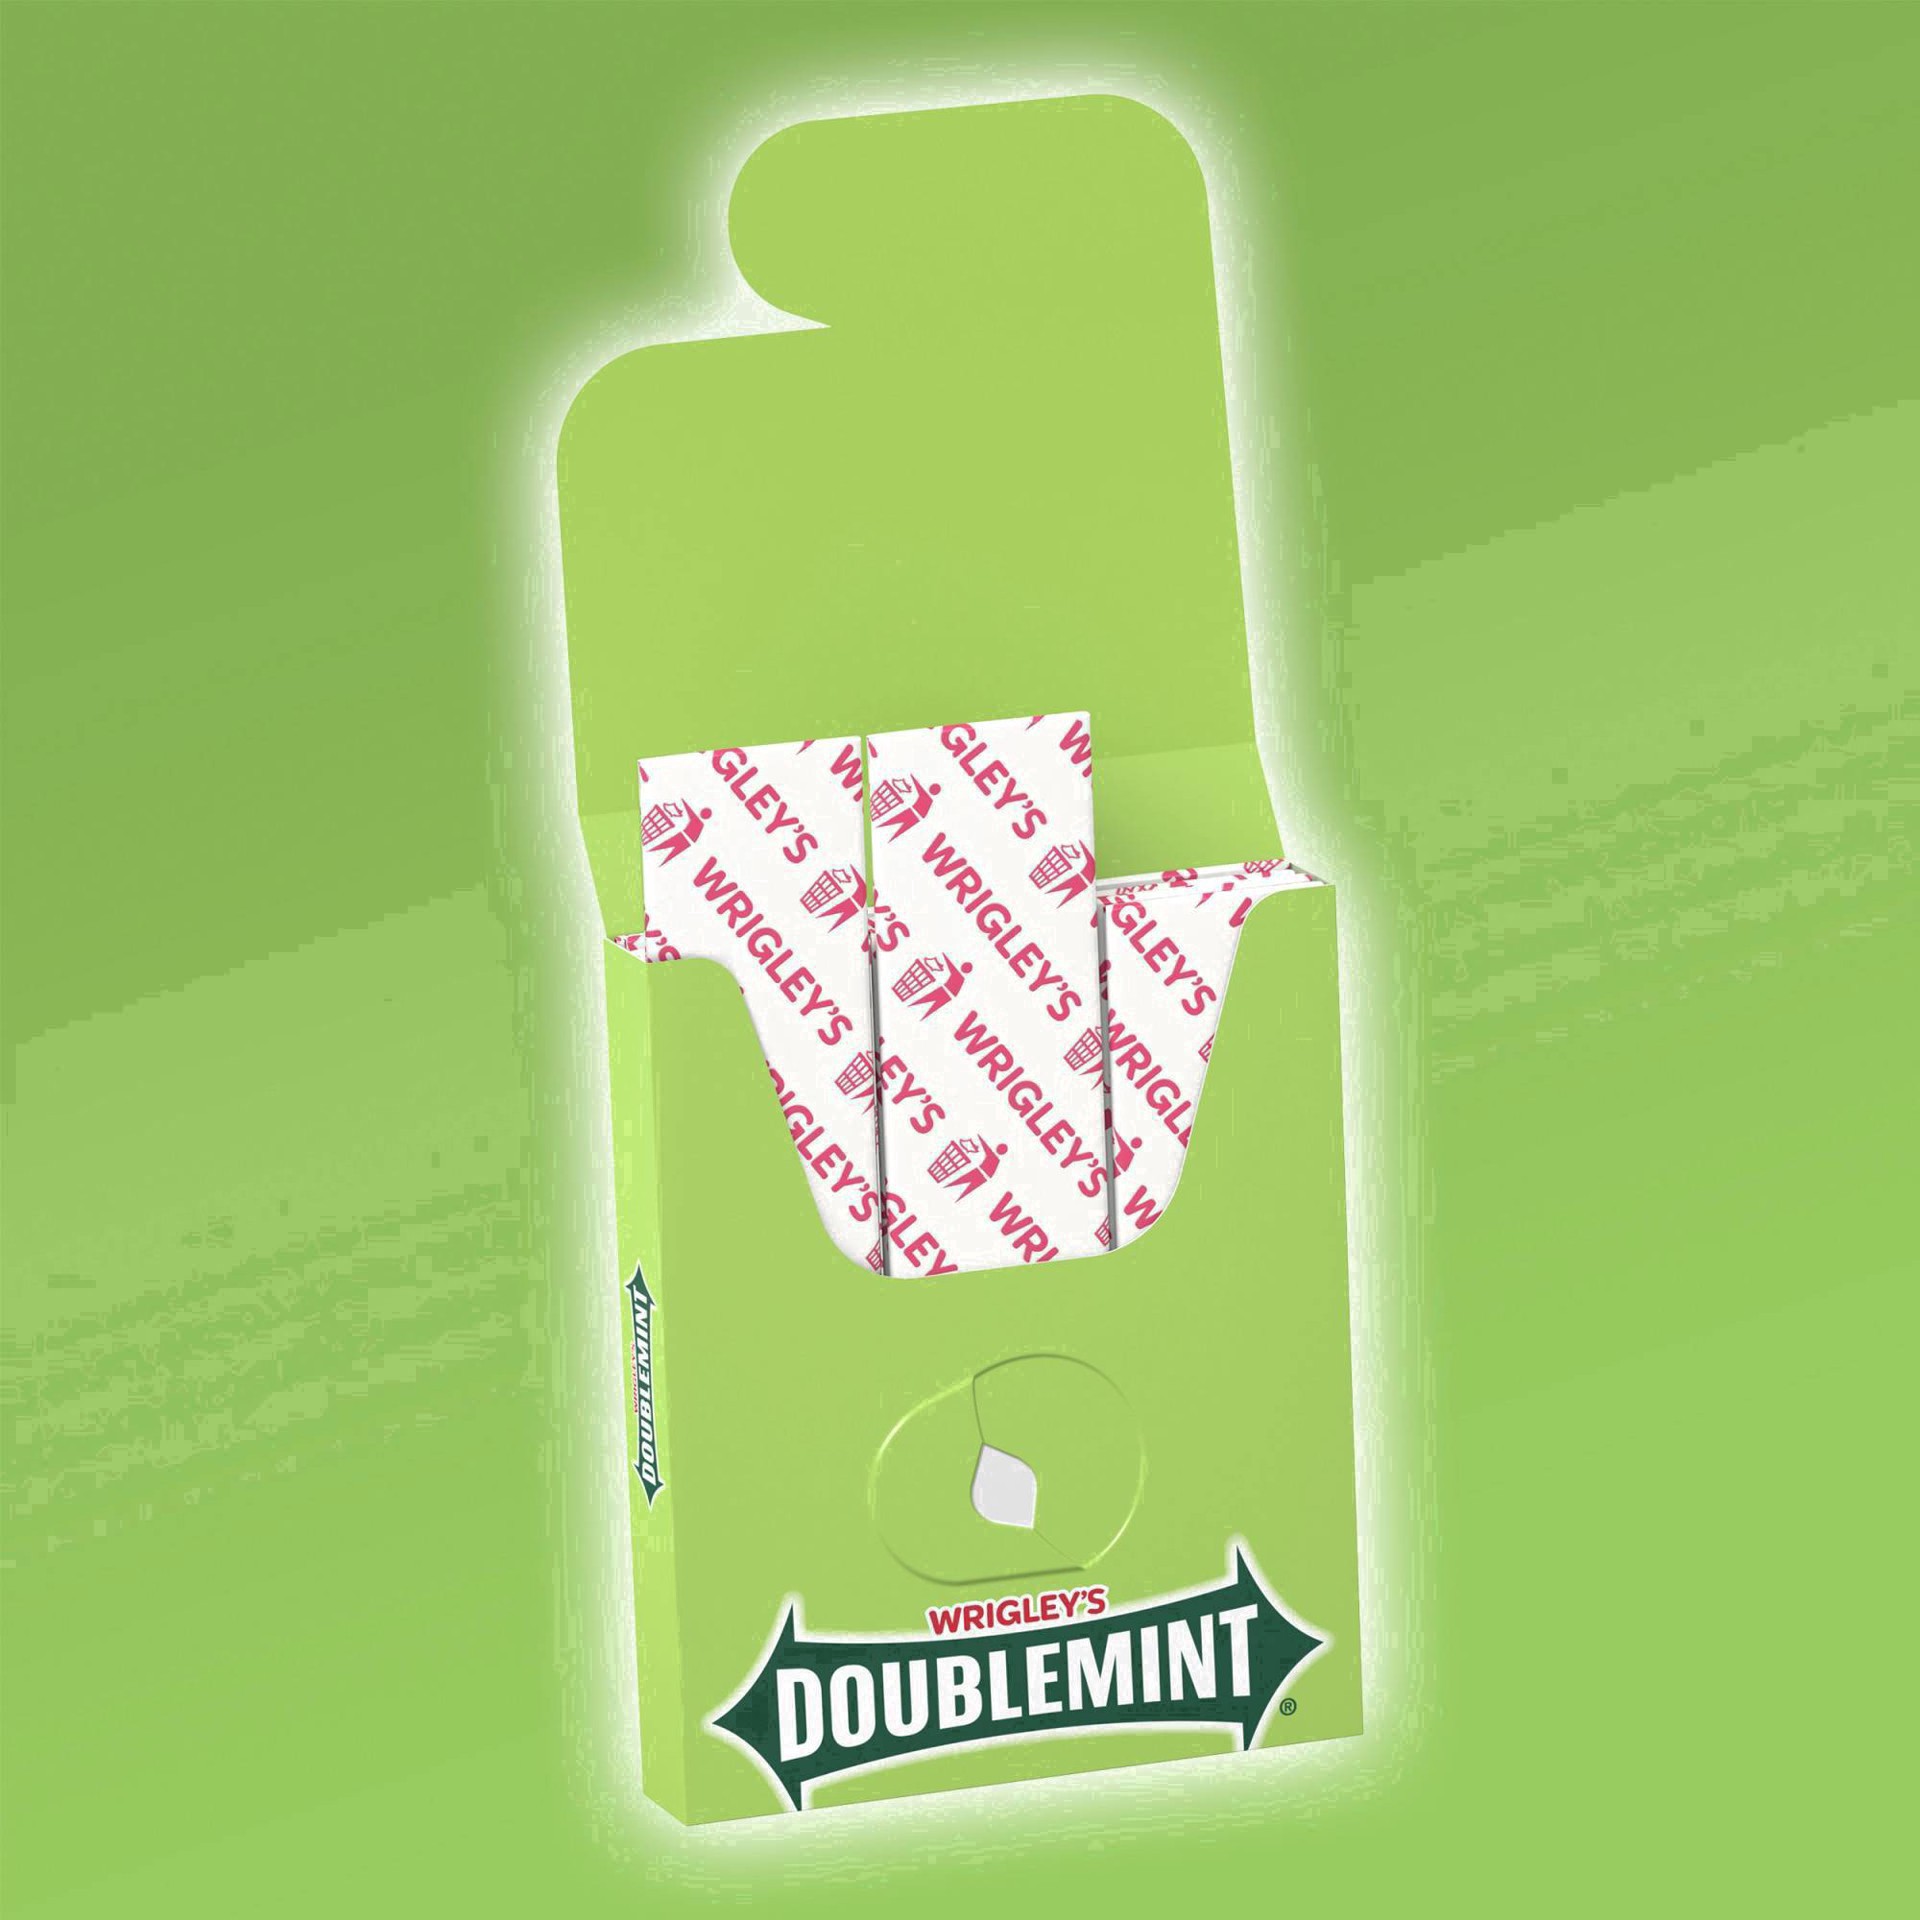 slide 89 of 134, Doublemint WRIGLEY'S DOUBLEMINT Bulk Chewing Gum, Value Pack, 15 ct (3 Pack), 45 ct